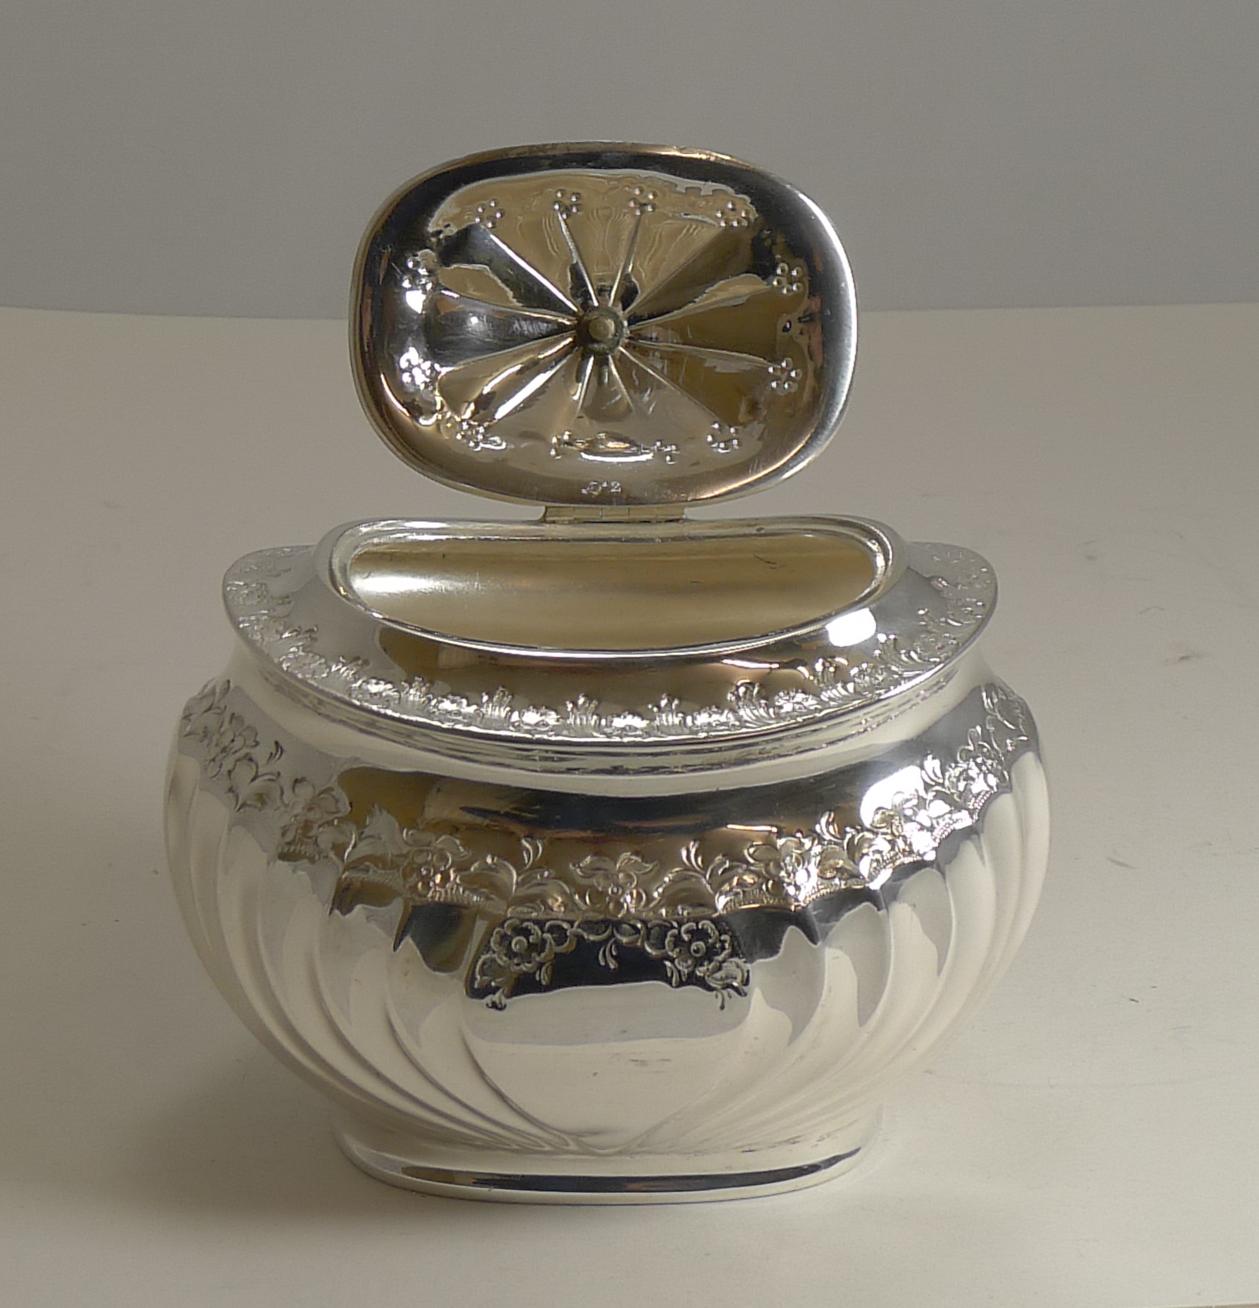 Grand English Silver Plated Tea Caddy by Atkin Brothers, Reg. 1889 4